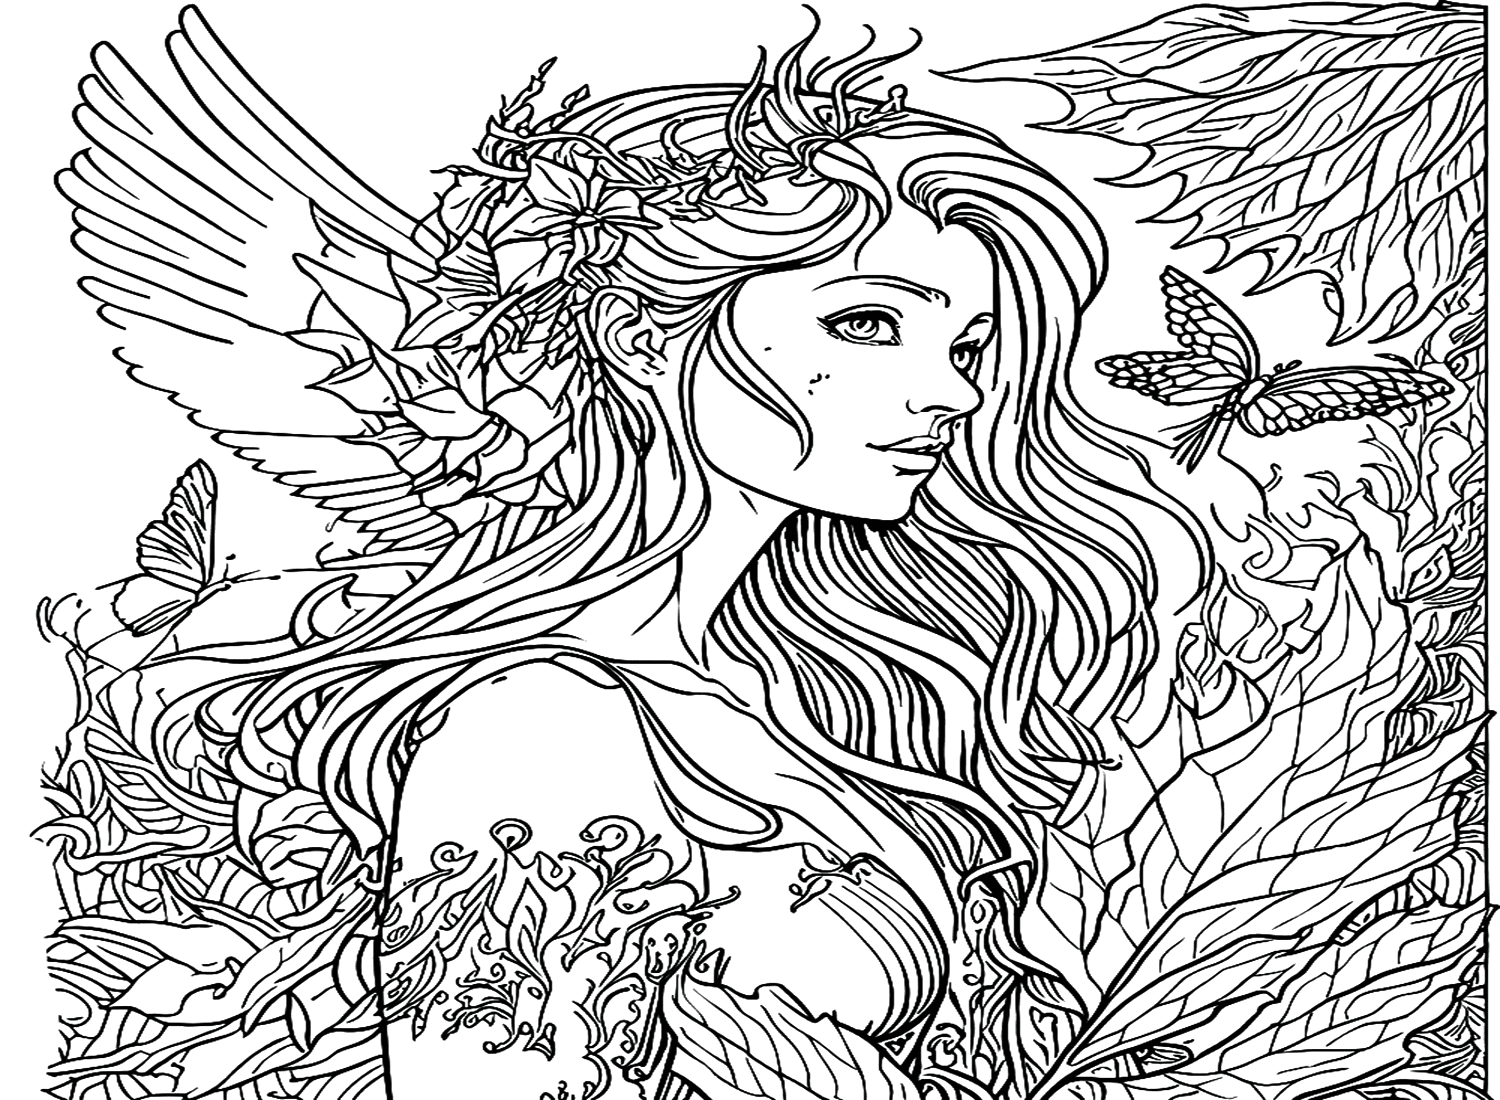 Fairy Coloring Pages For Adults - Fairy Coloring Pages - Coloring Pages